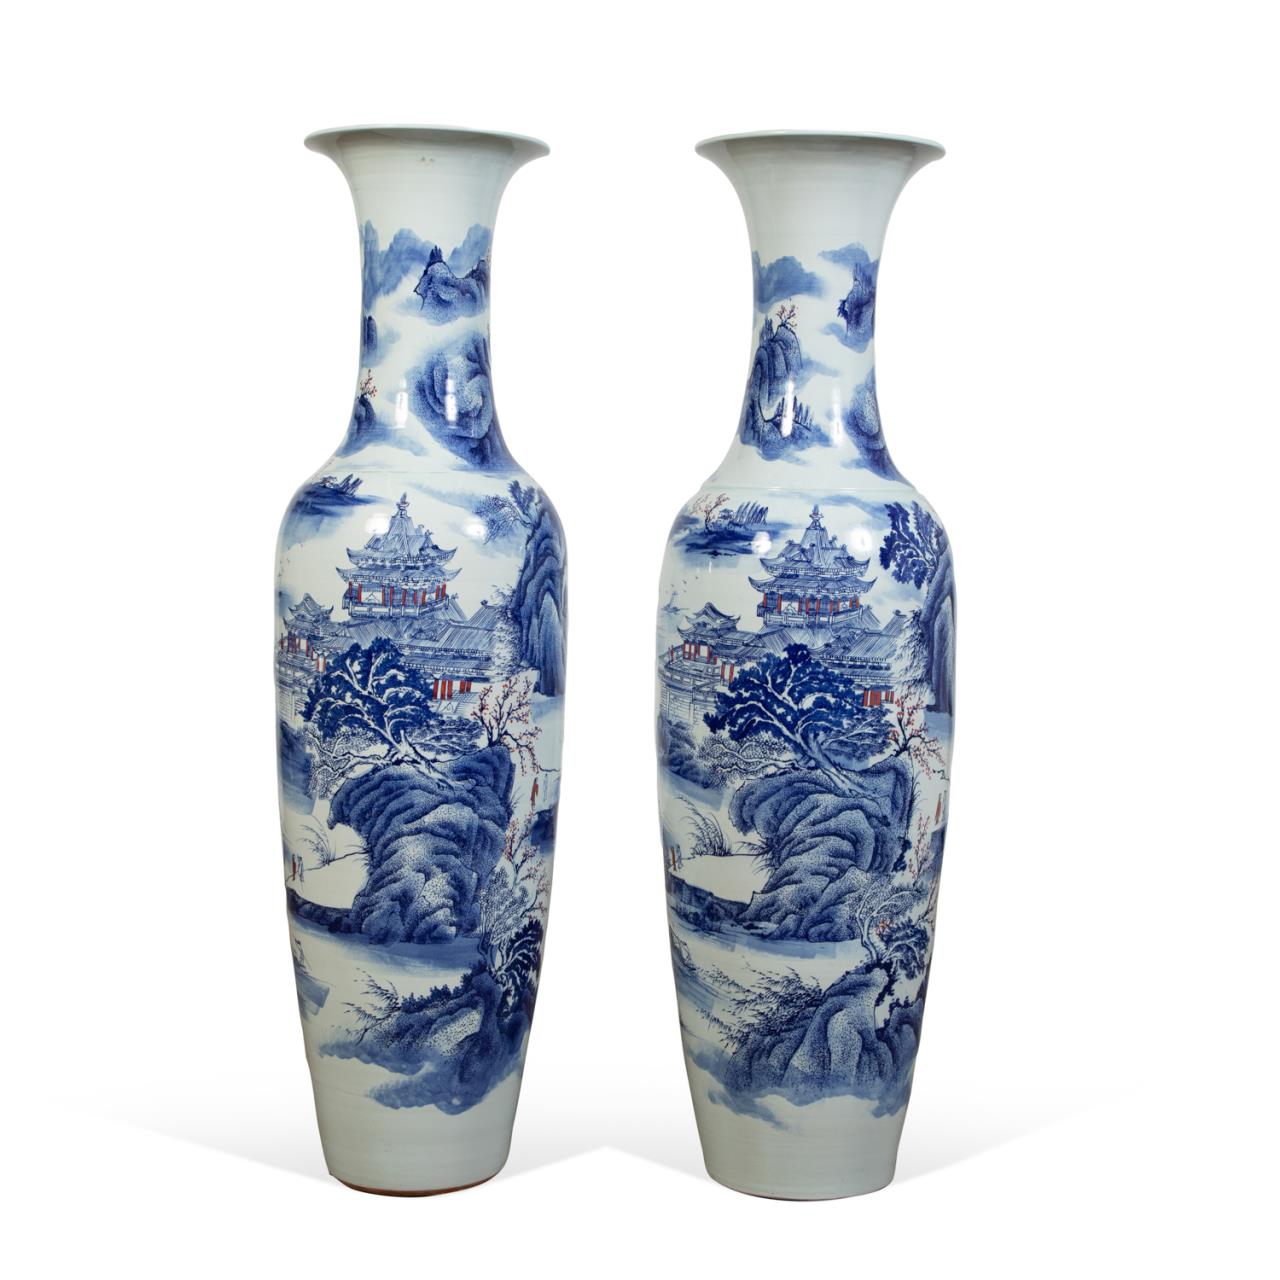 PAIR OF TALL CHINESE BLUE, WHITE